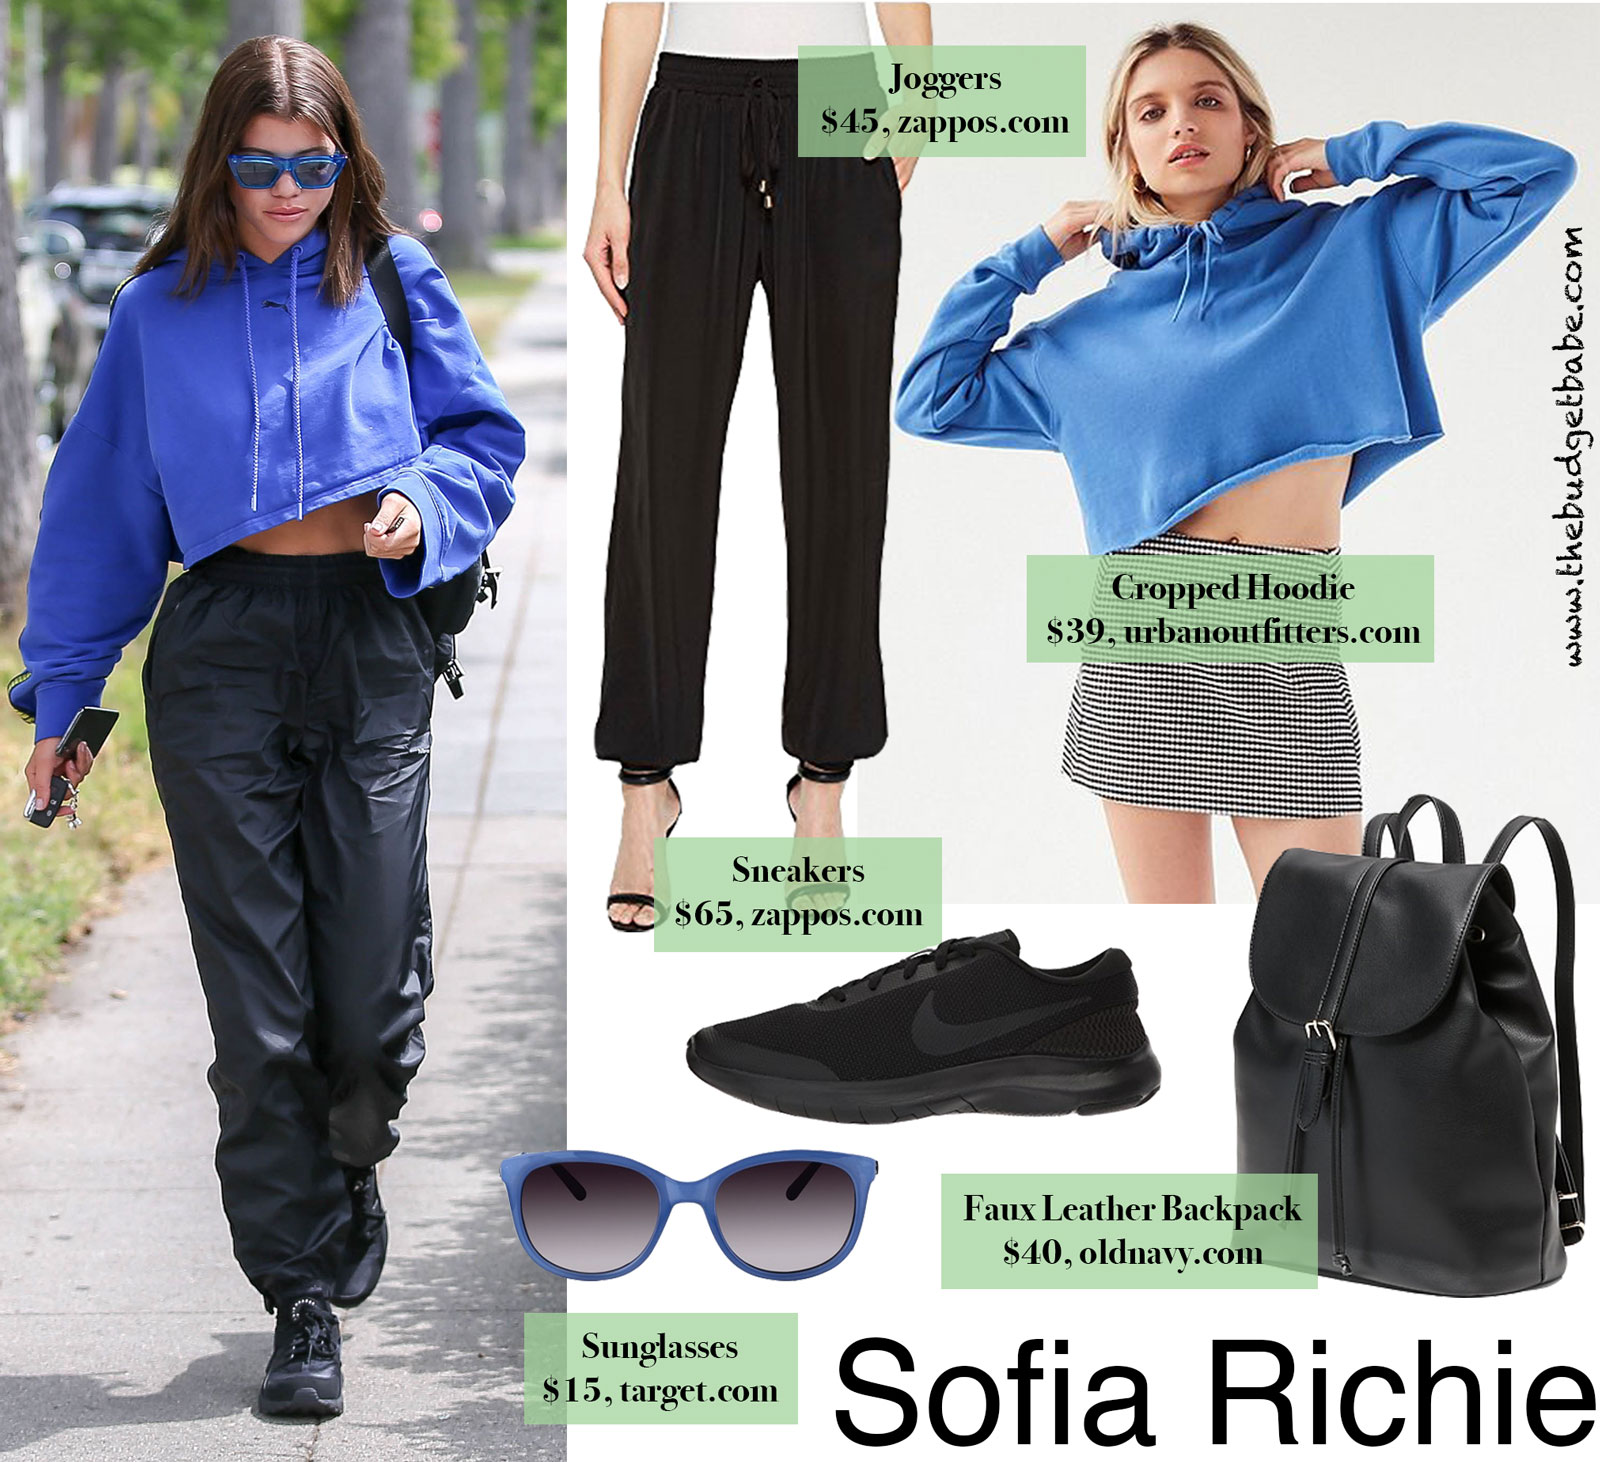 Sofia Richie Cropped Hoodie Look for Less